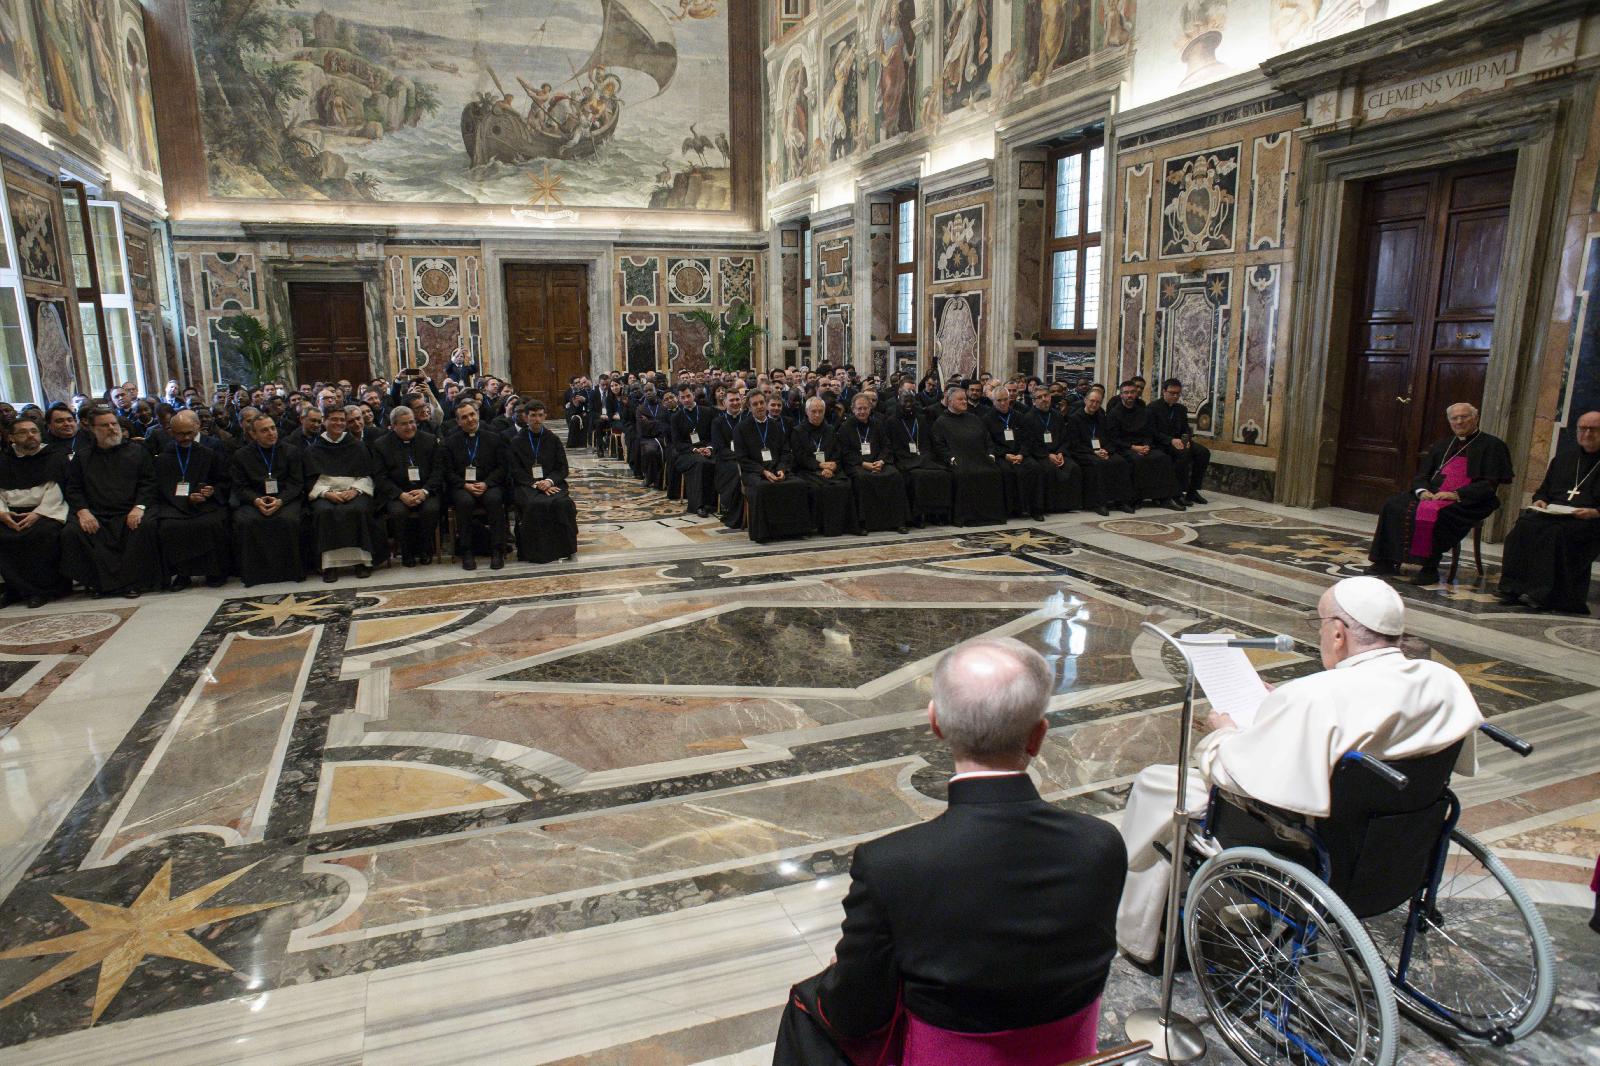 Liturgy must not be 'exploited' in service of ideology, says Pope 